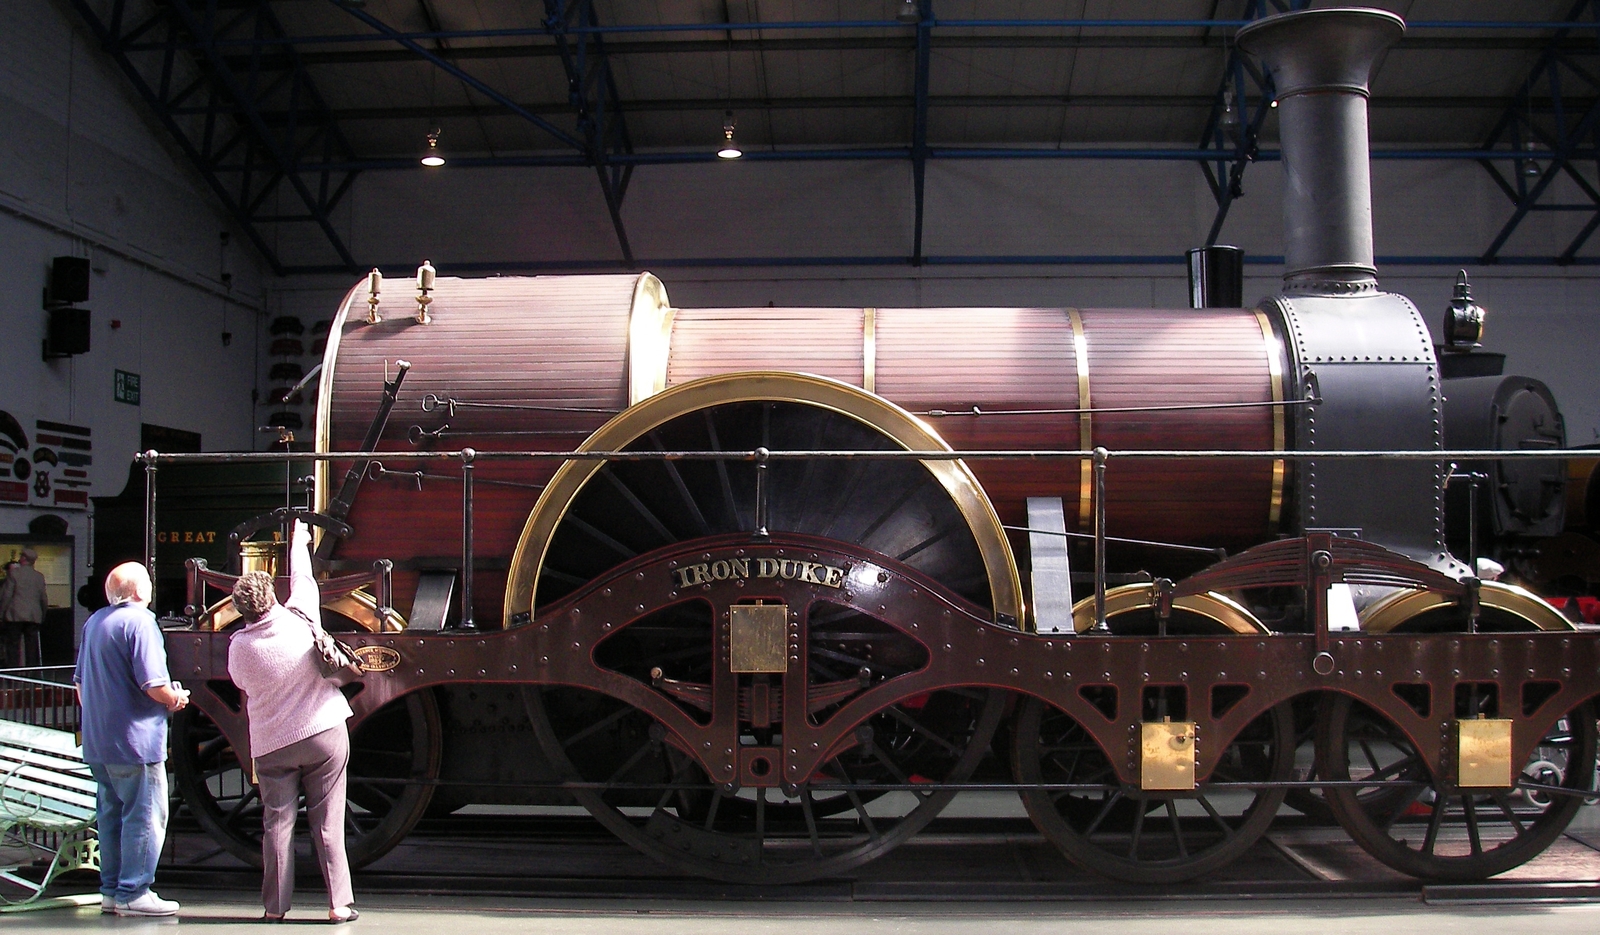 Replica of the GWR “Iron Duke” with fixed leading axles